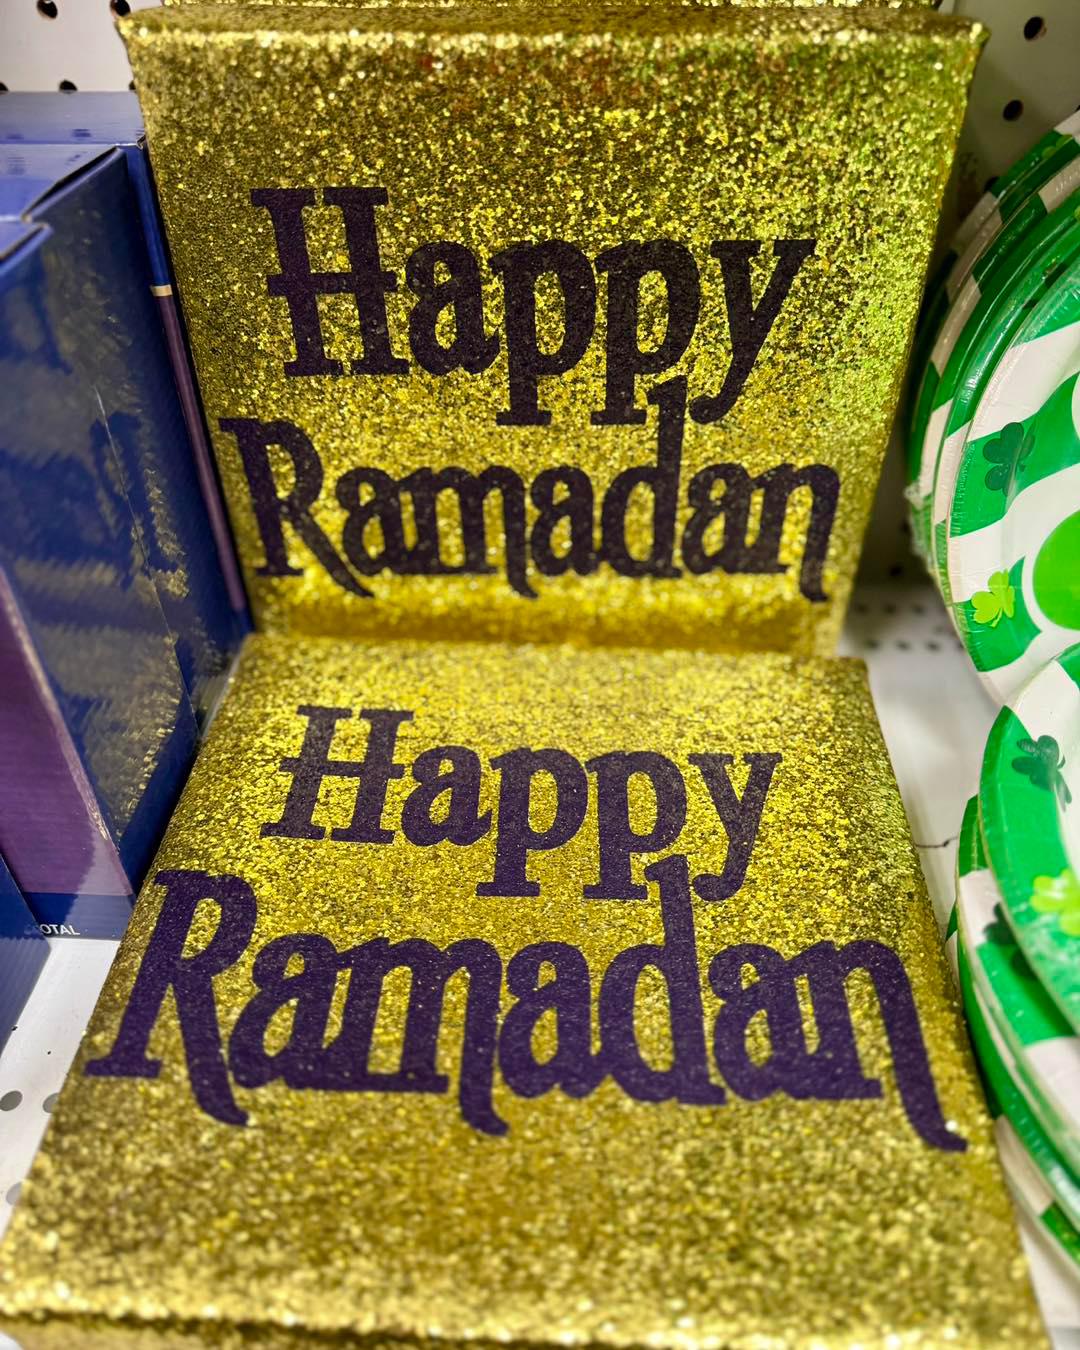 The holy month of Ramadan starts soon! Get ready to elevate your Ramadan celebrations with our stunn Affordable Treasures Los Gatos (408)356-3101